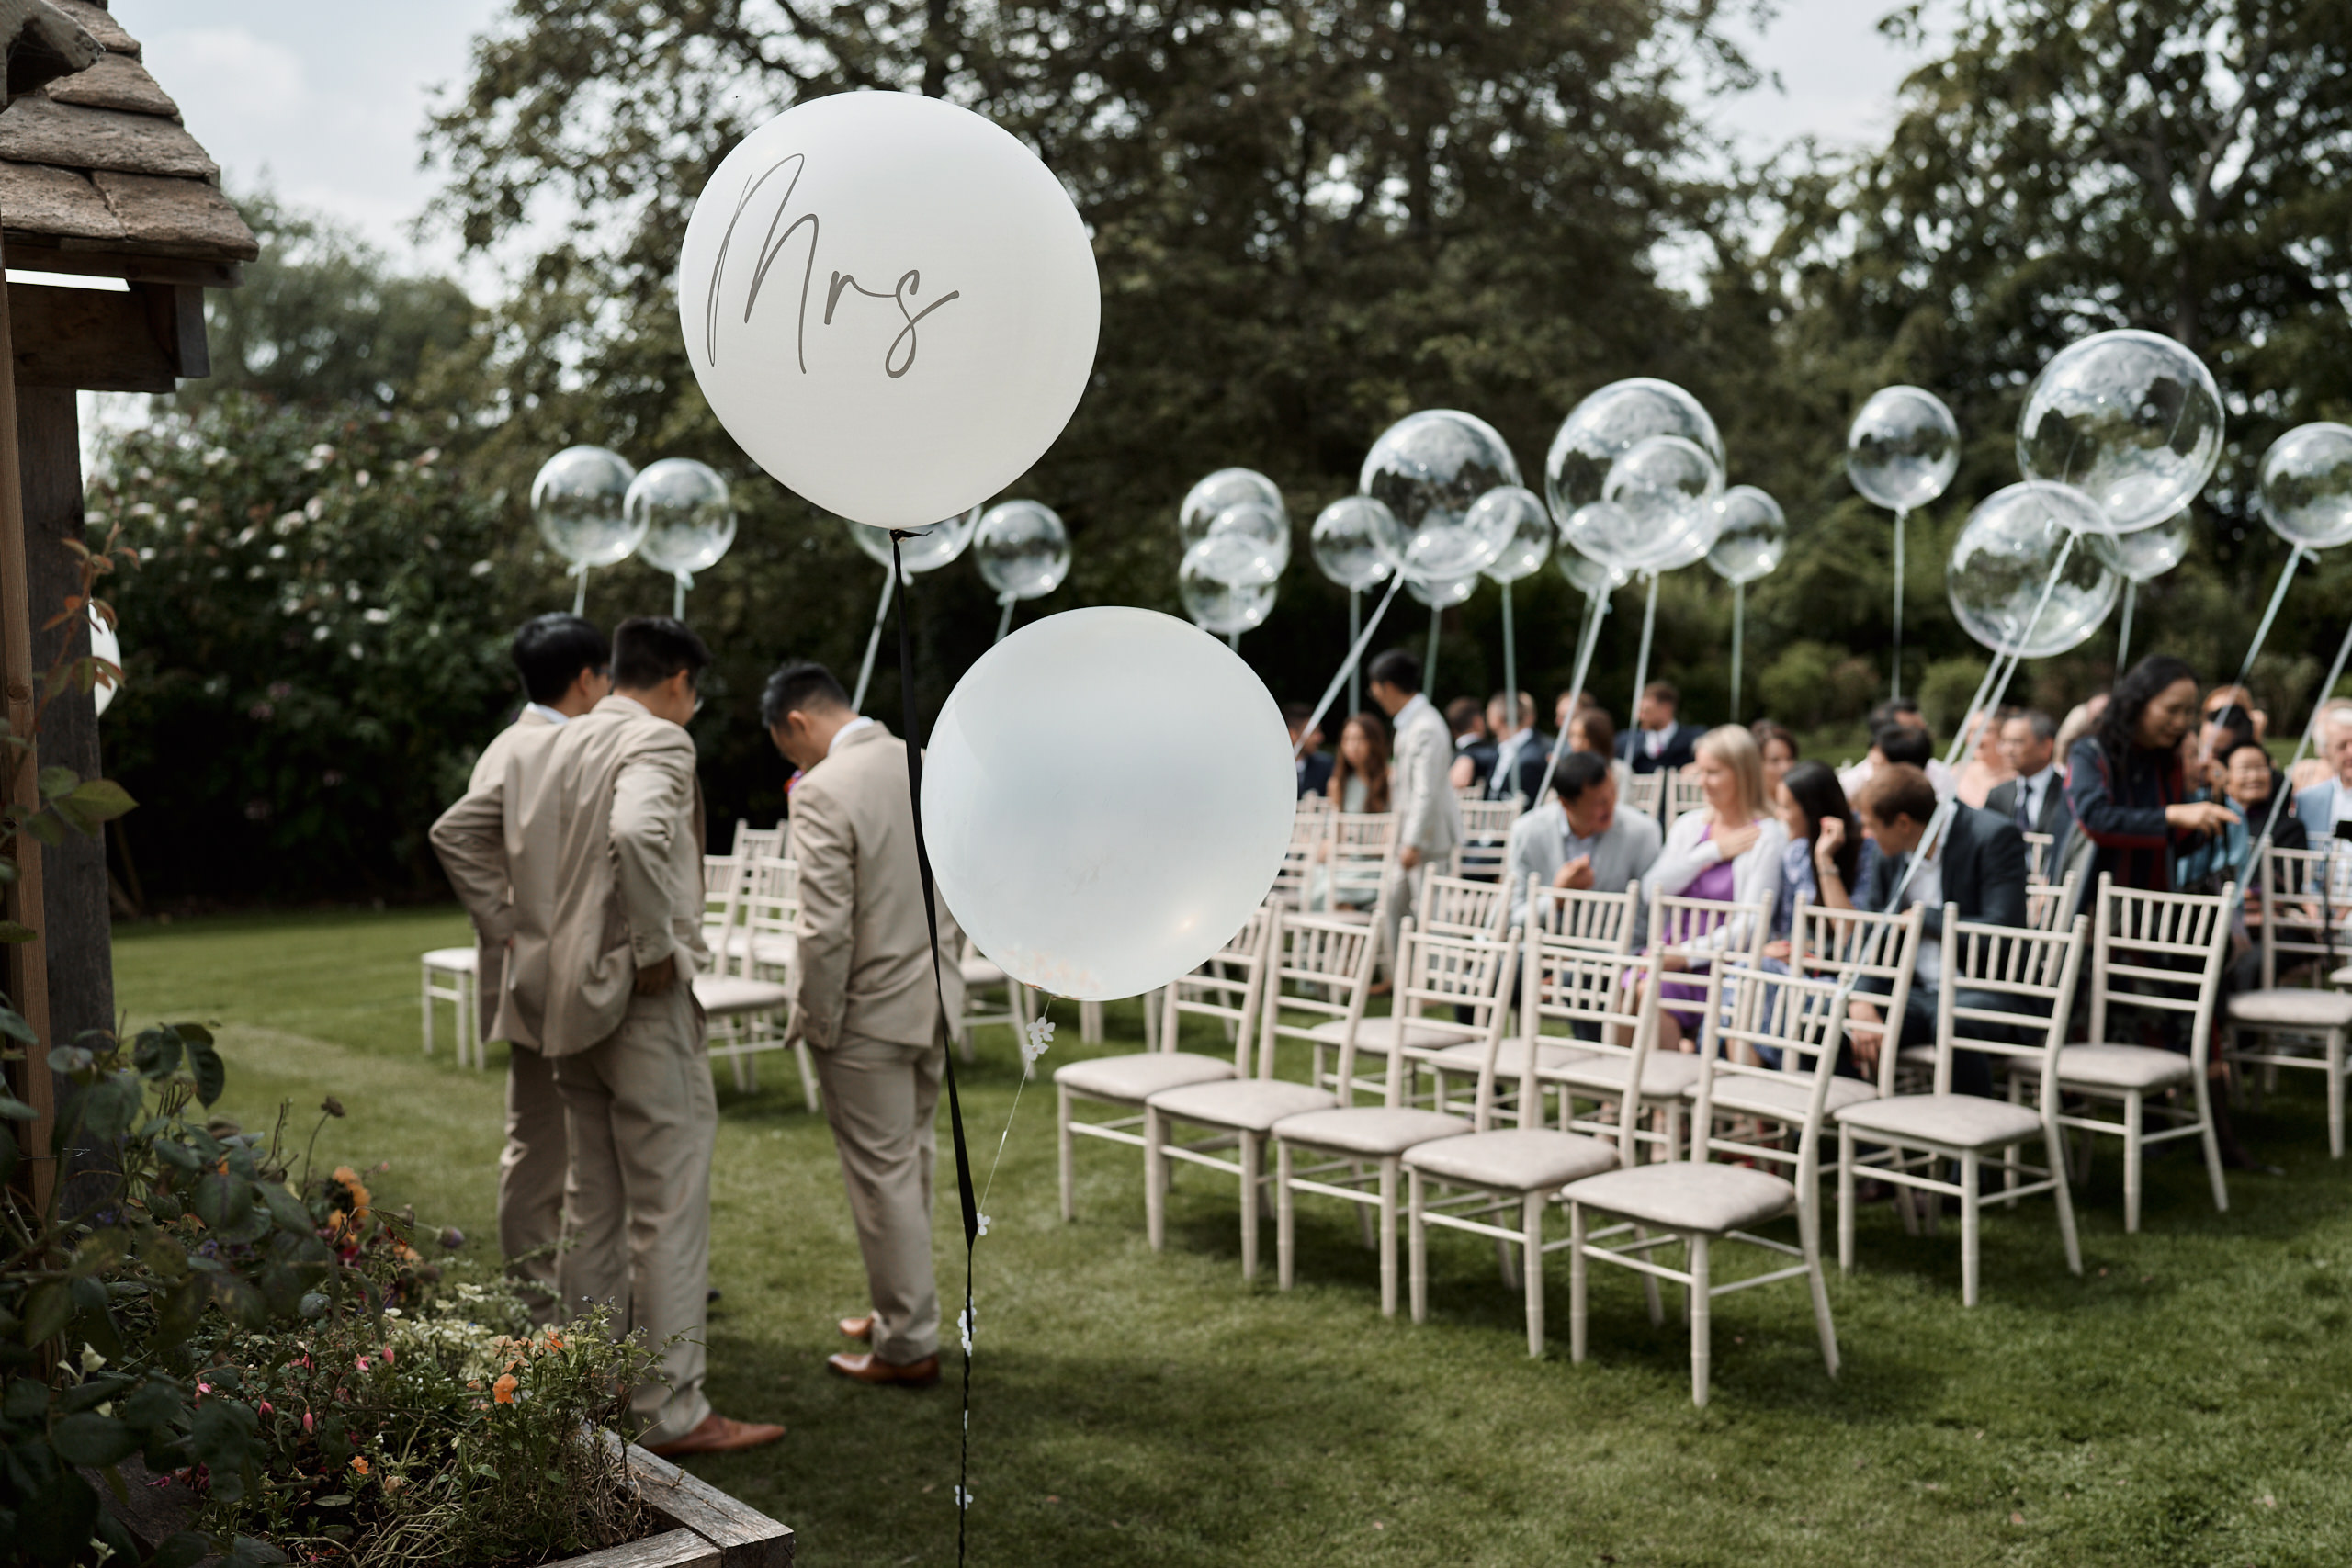 A wedding happening outside with balloons on the grass.